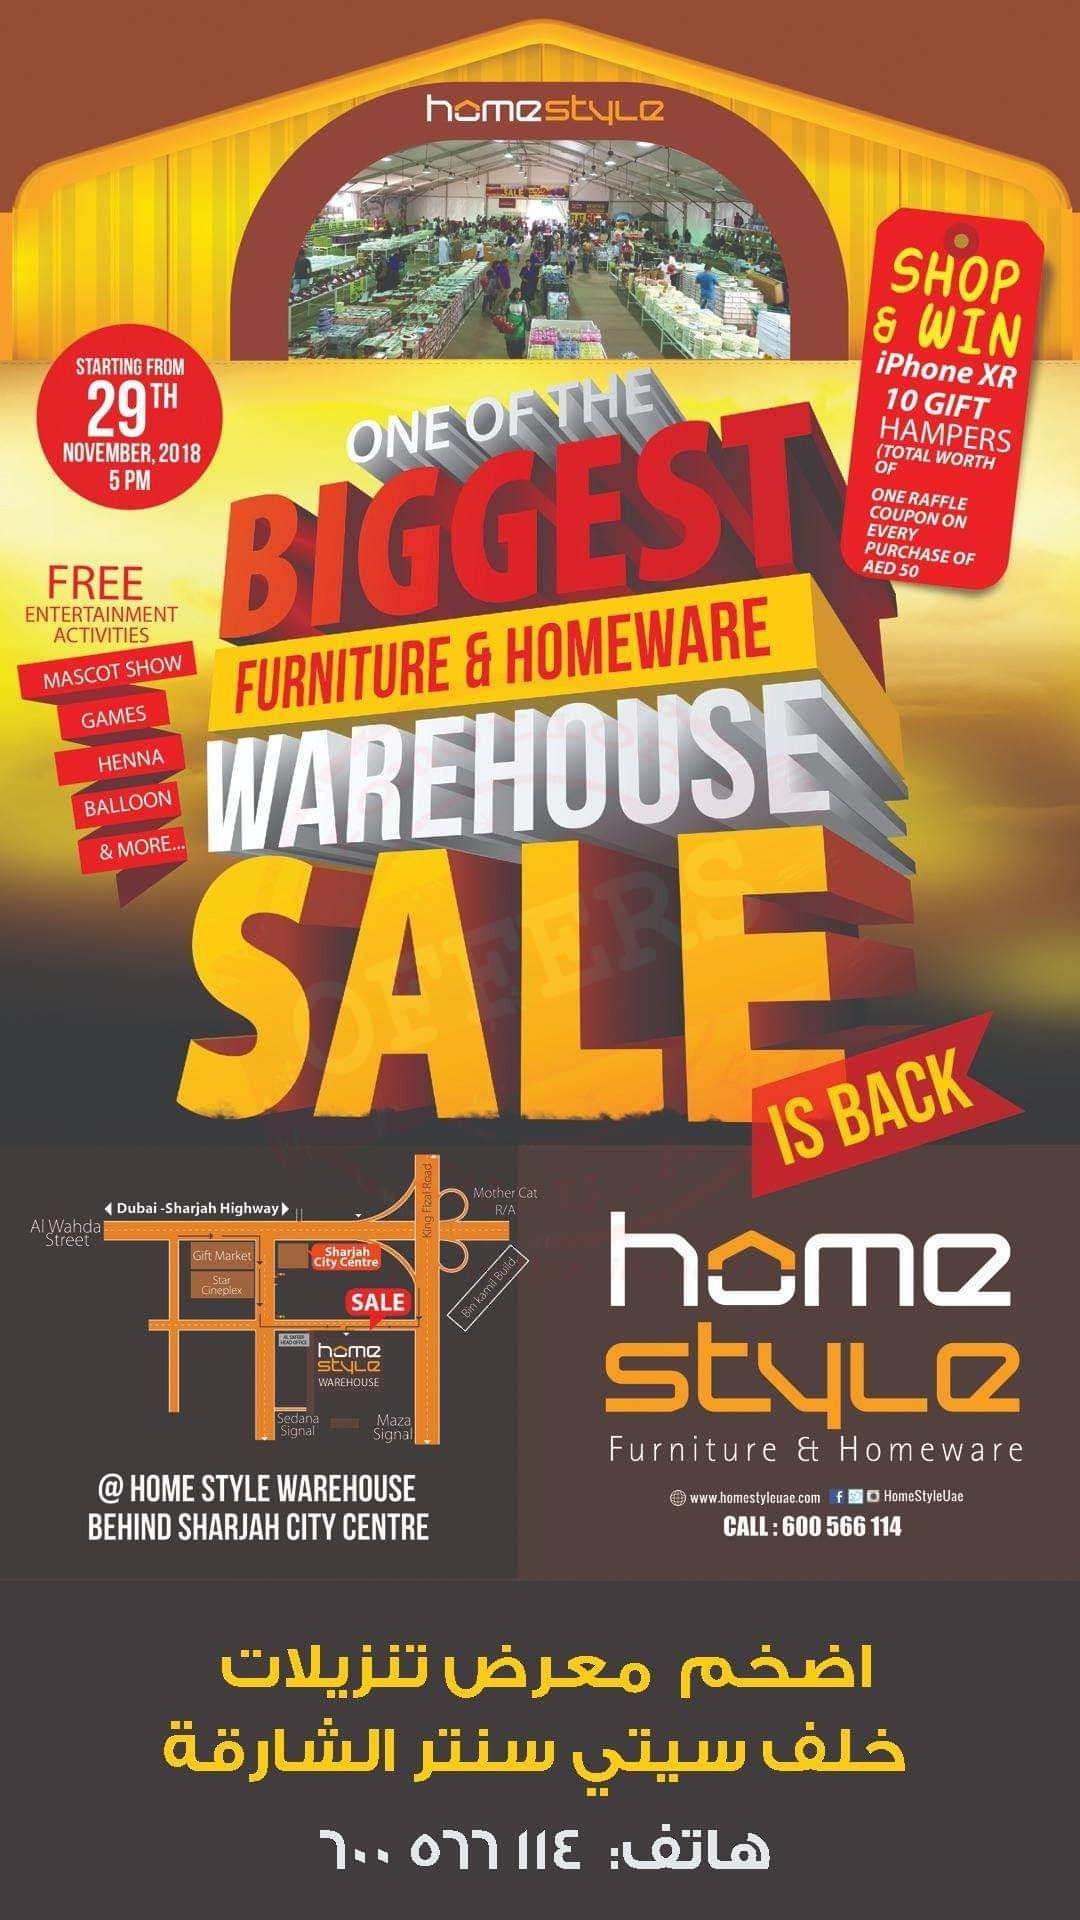 Shop and win iPhoneXR at Home Style Warehouse Sale